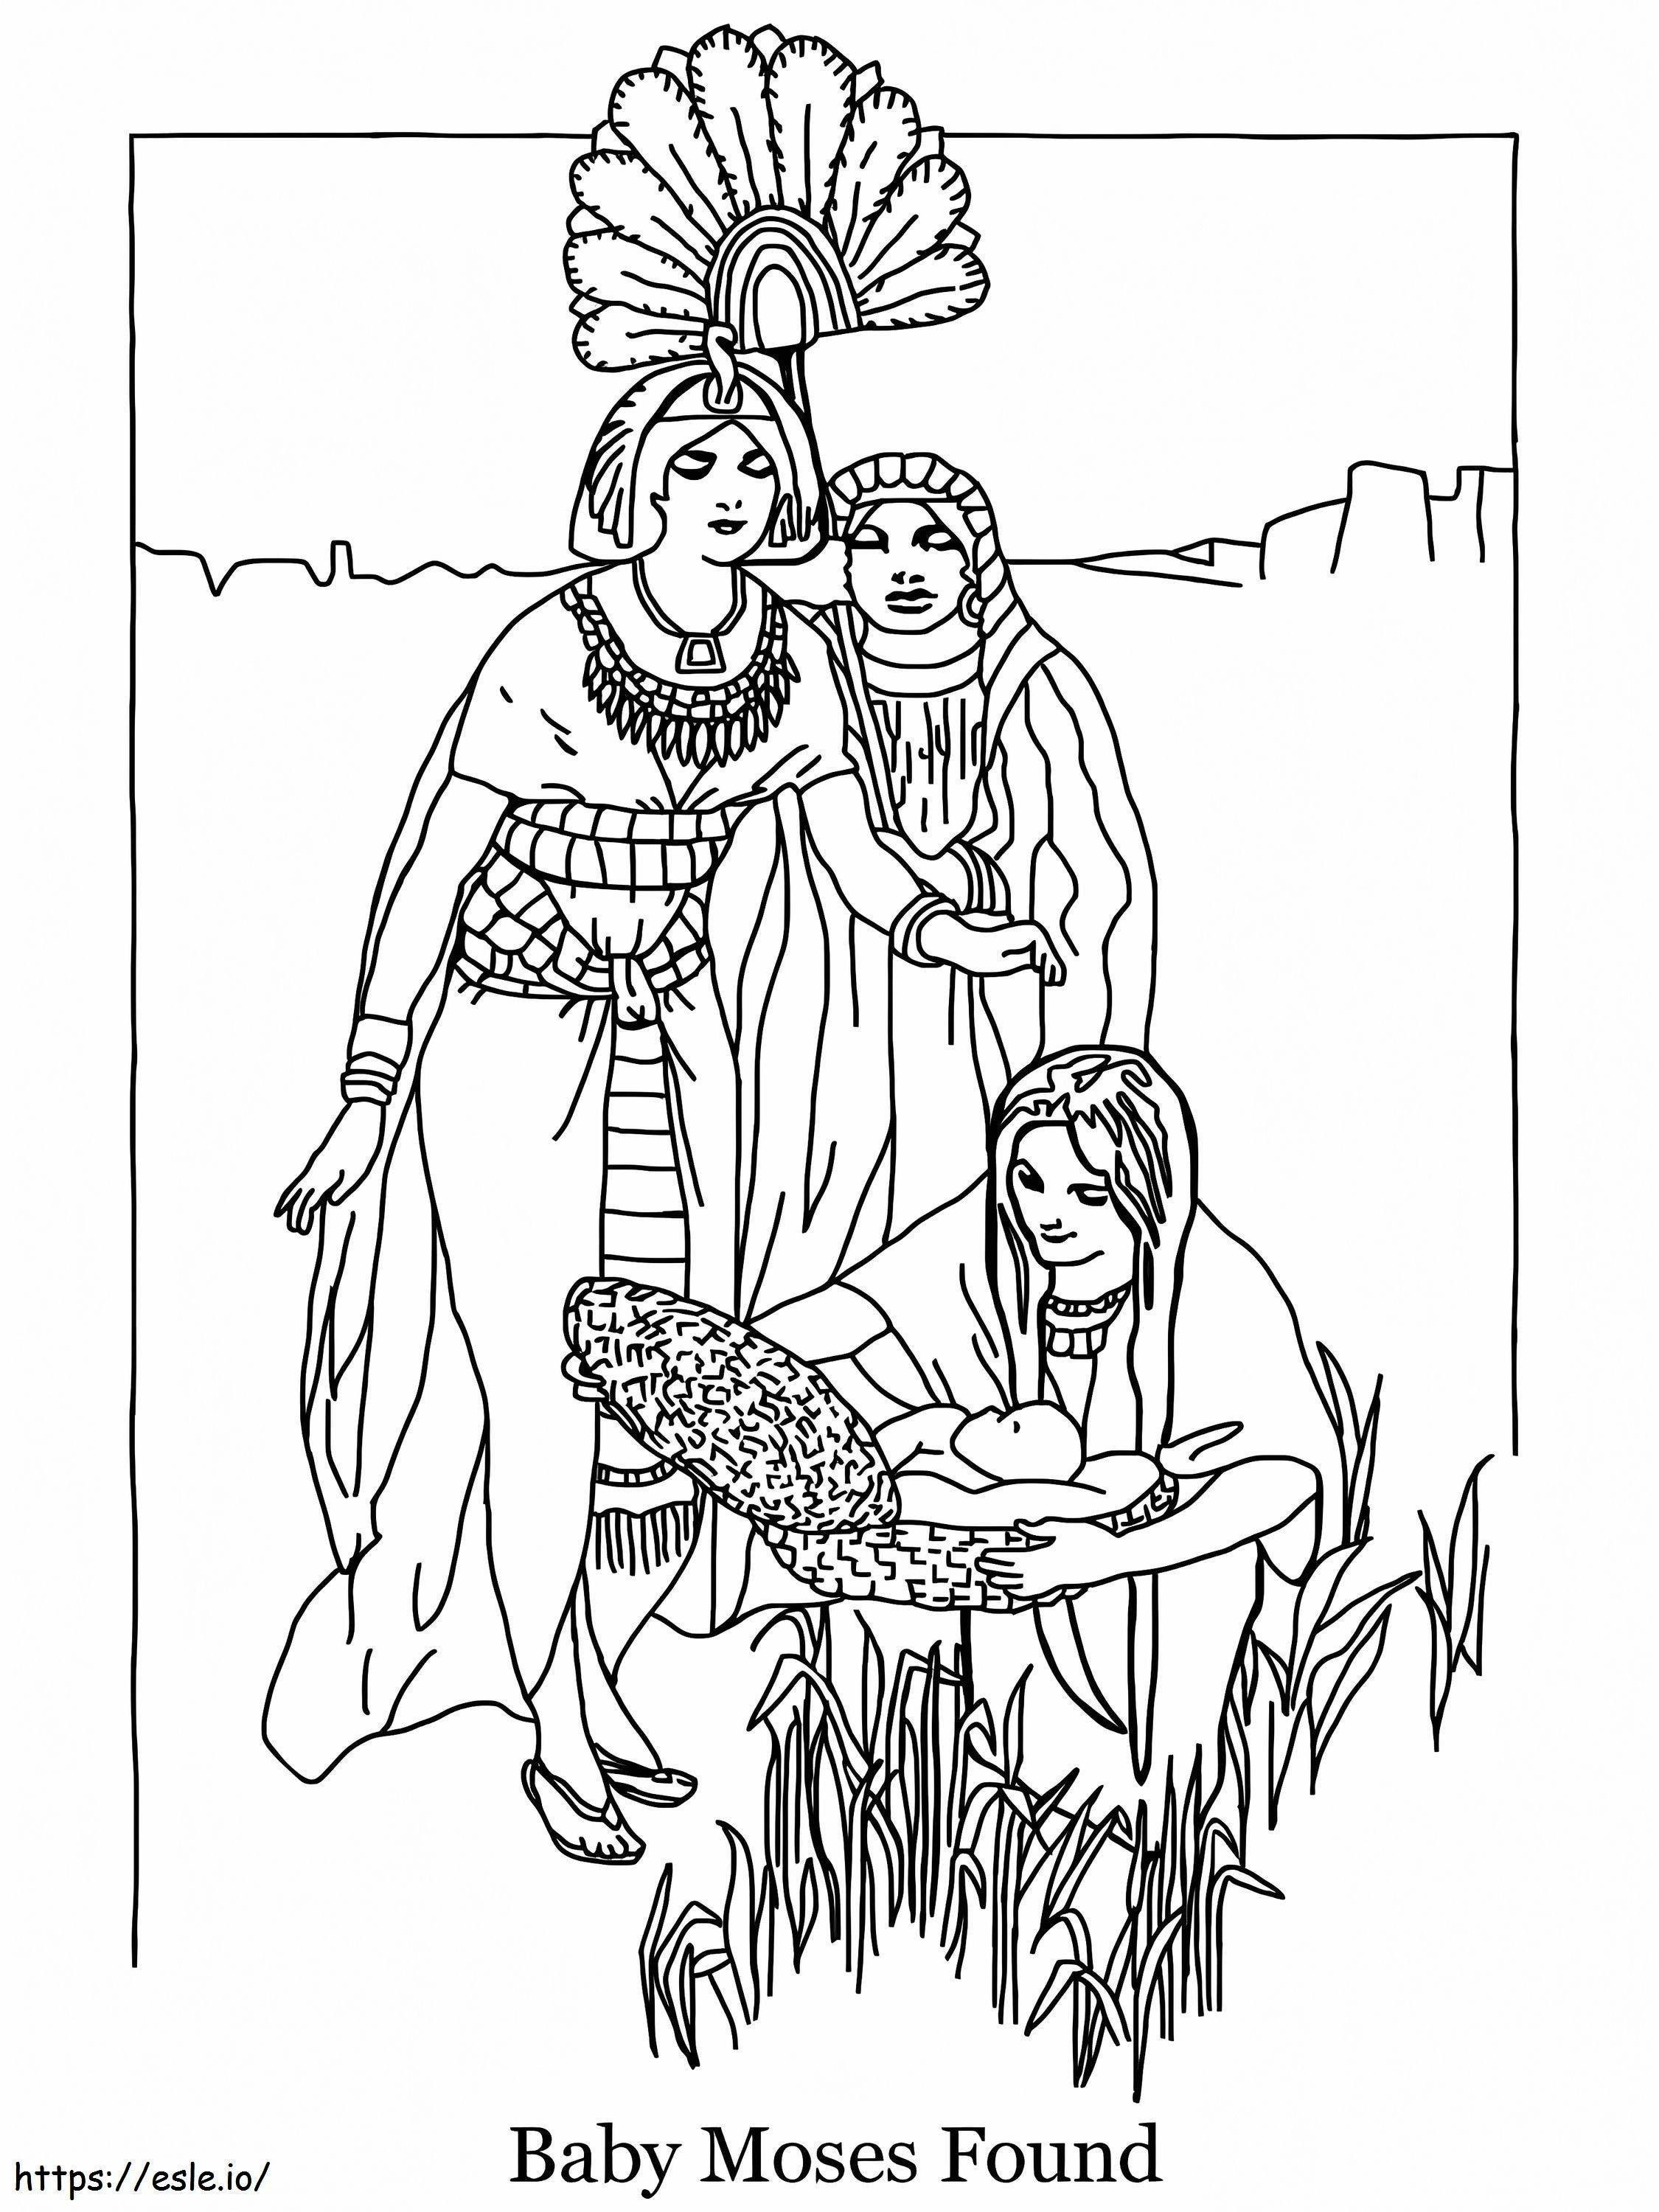 Baby Moses Found coloring page